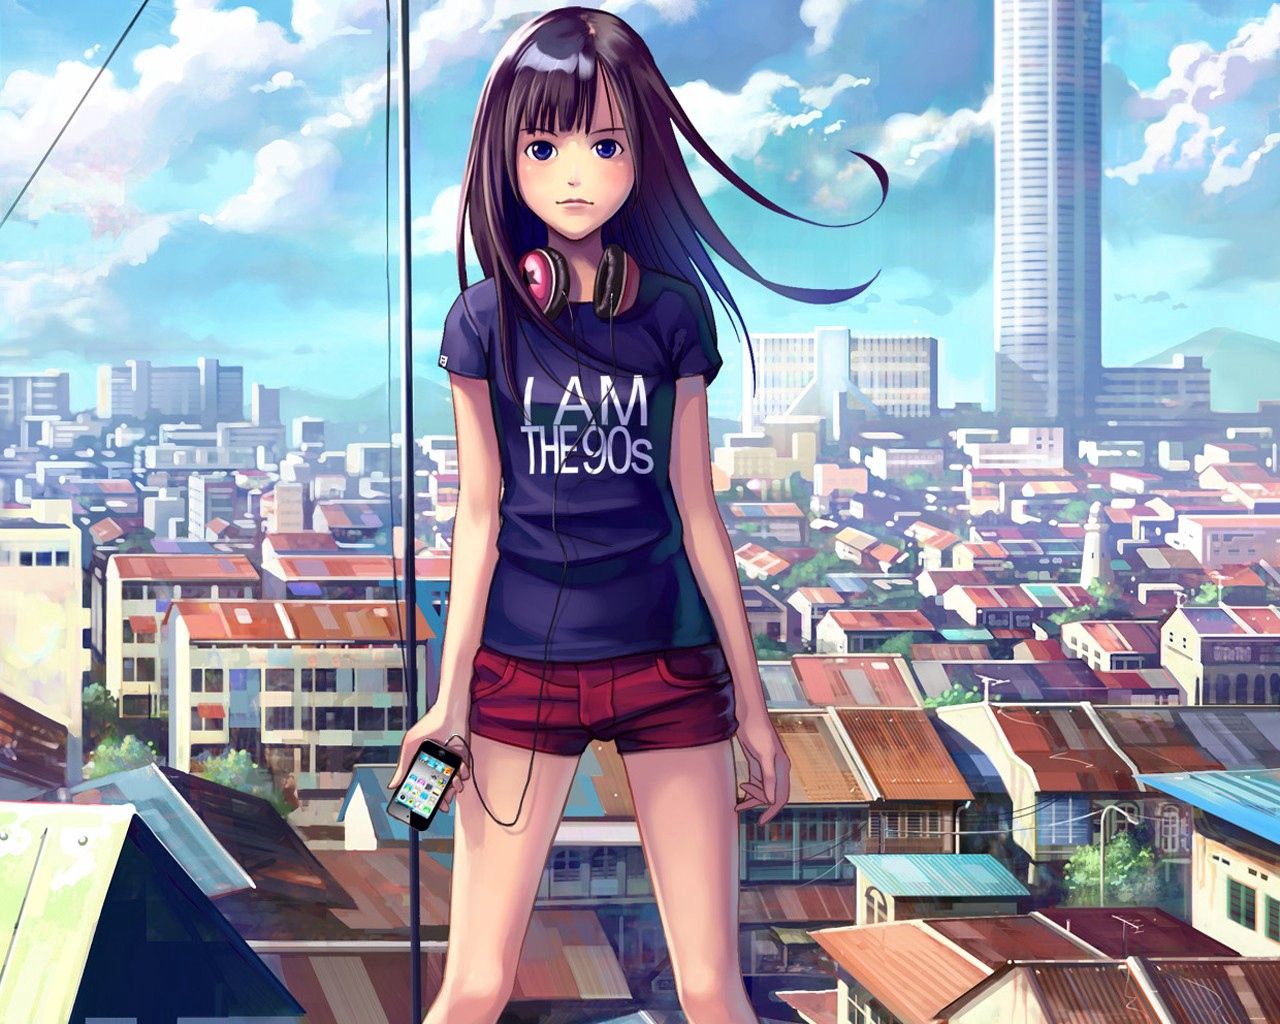 149550 download wallpaper anime, headphones, city, girl, telephone, brunette screensavers and pictures for free